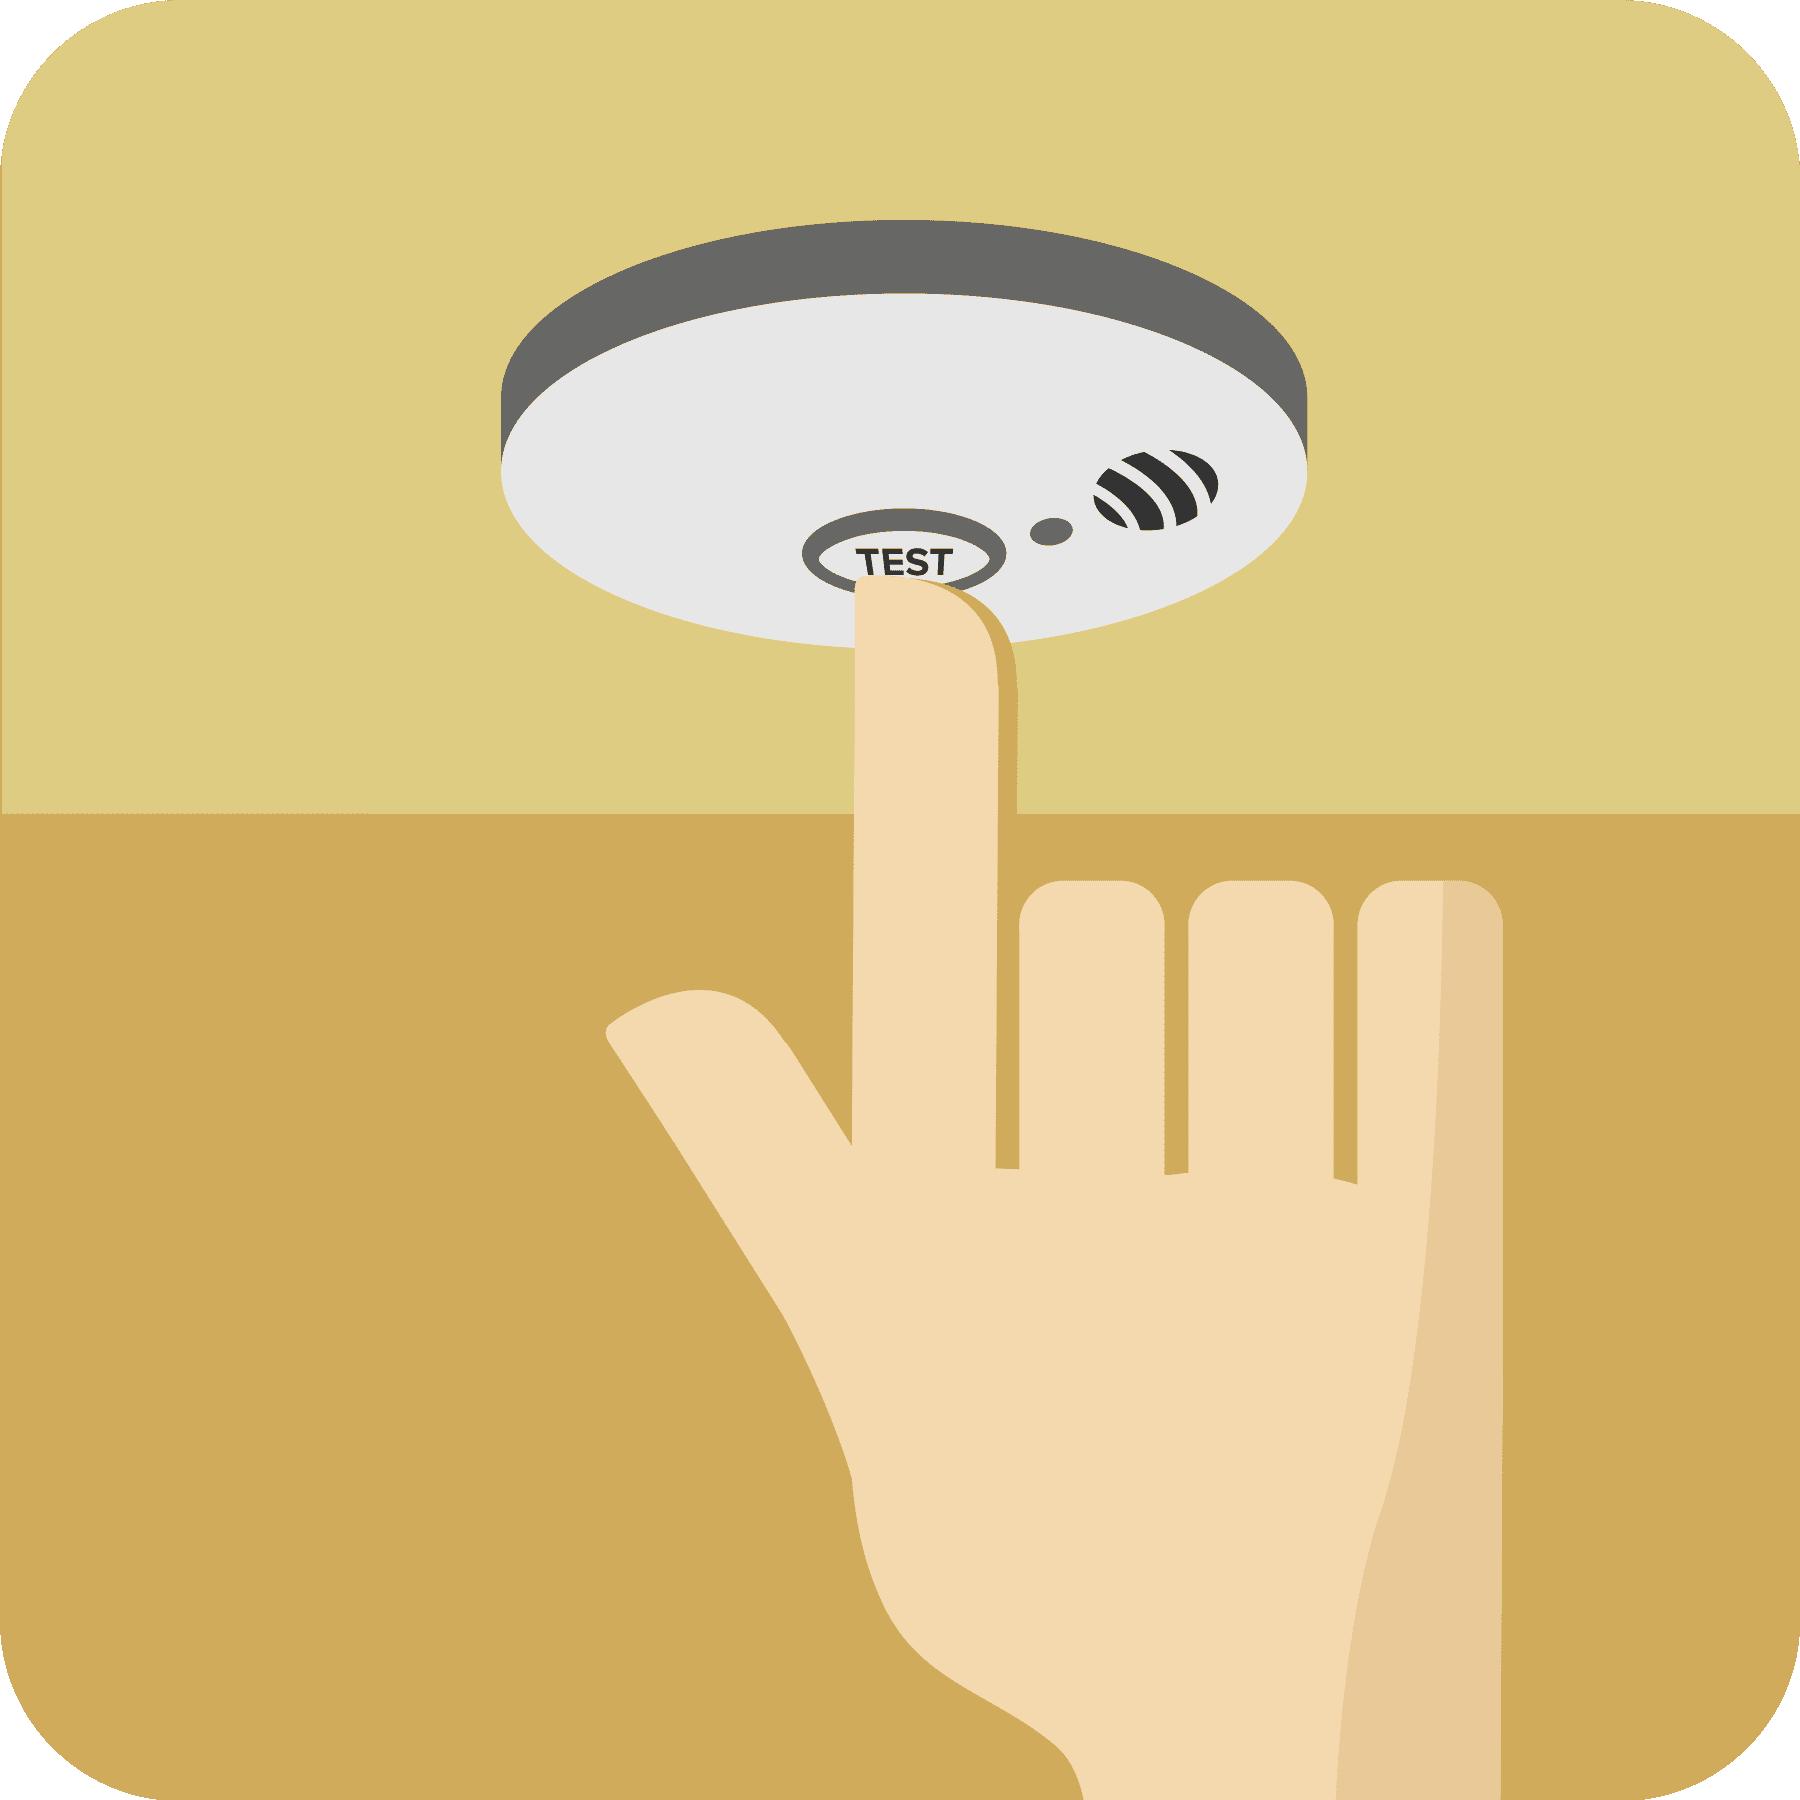 A finger pressing the test button on a smoke alarm.